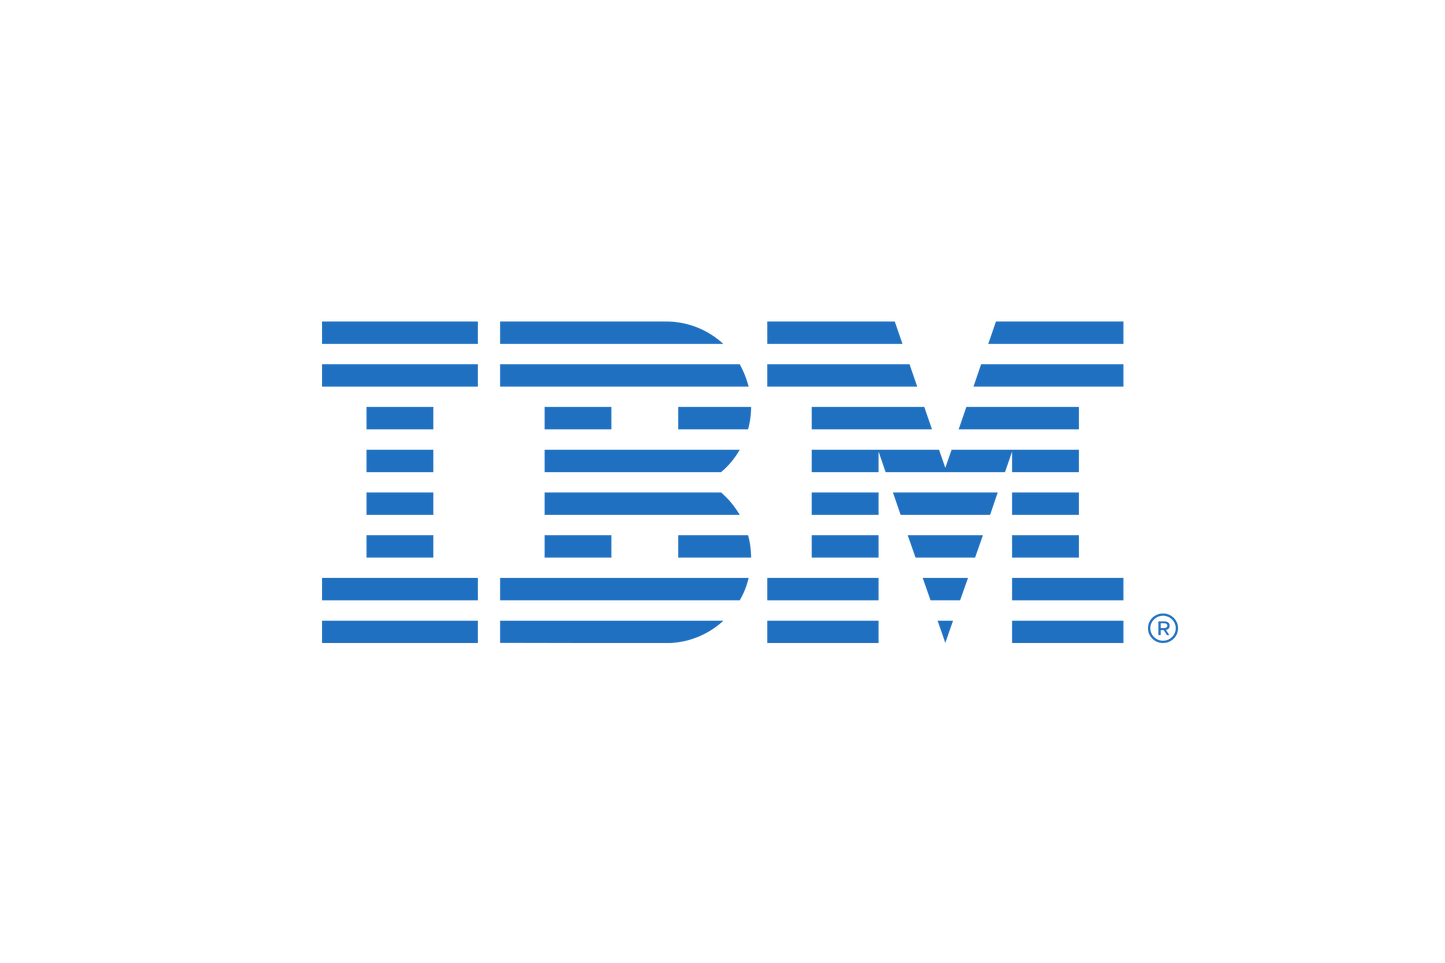 IBM Storage Suite for IBM Cloud Paks and IBM Spectrum Accelerate Terabyte Monthly License